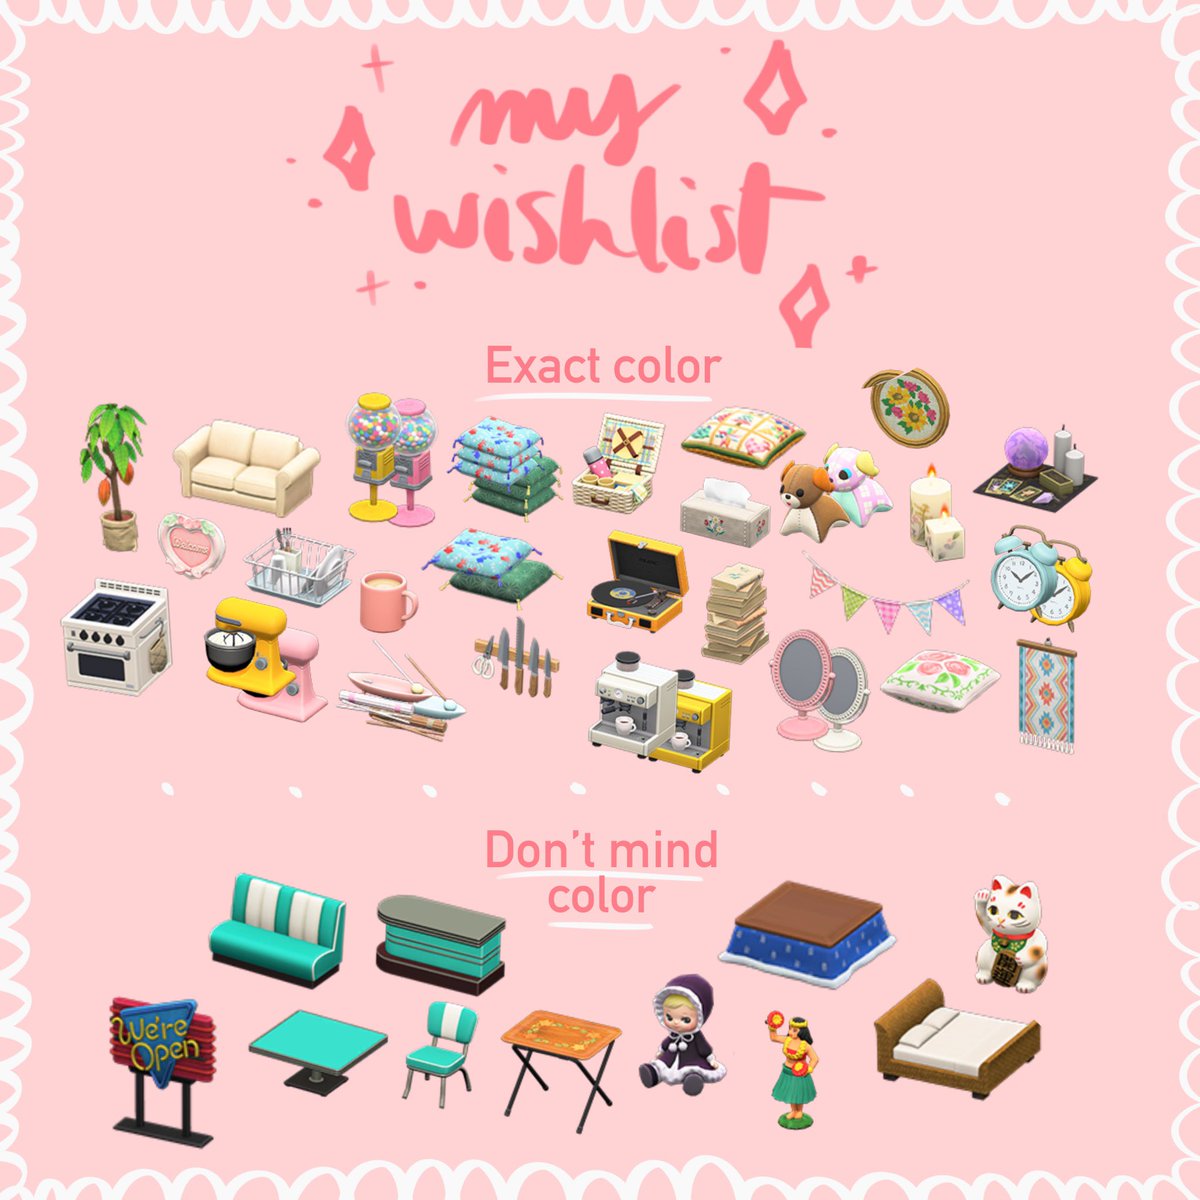 MY WISHLIST IS HERE, FINALLY!If you’d like to sell/trade or let me catalogue any of this stuff please dm me!I know the mom stuff is really difficult to get so we could arrange something